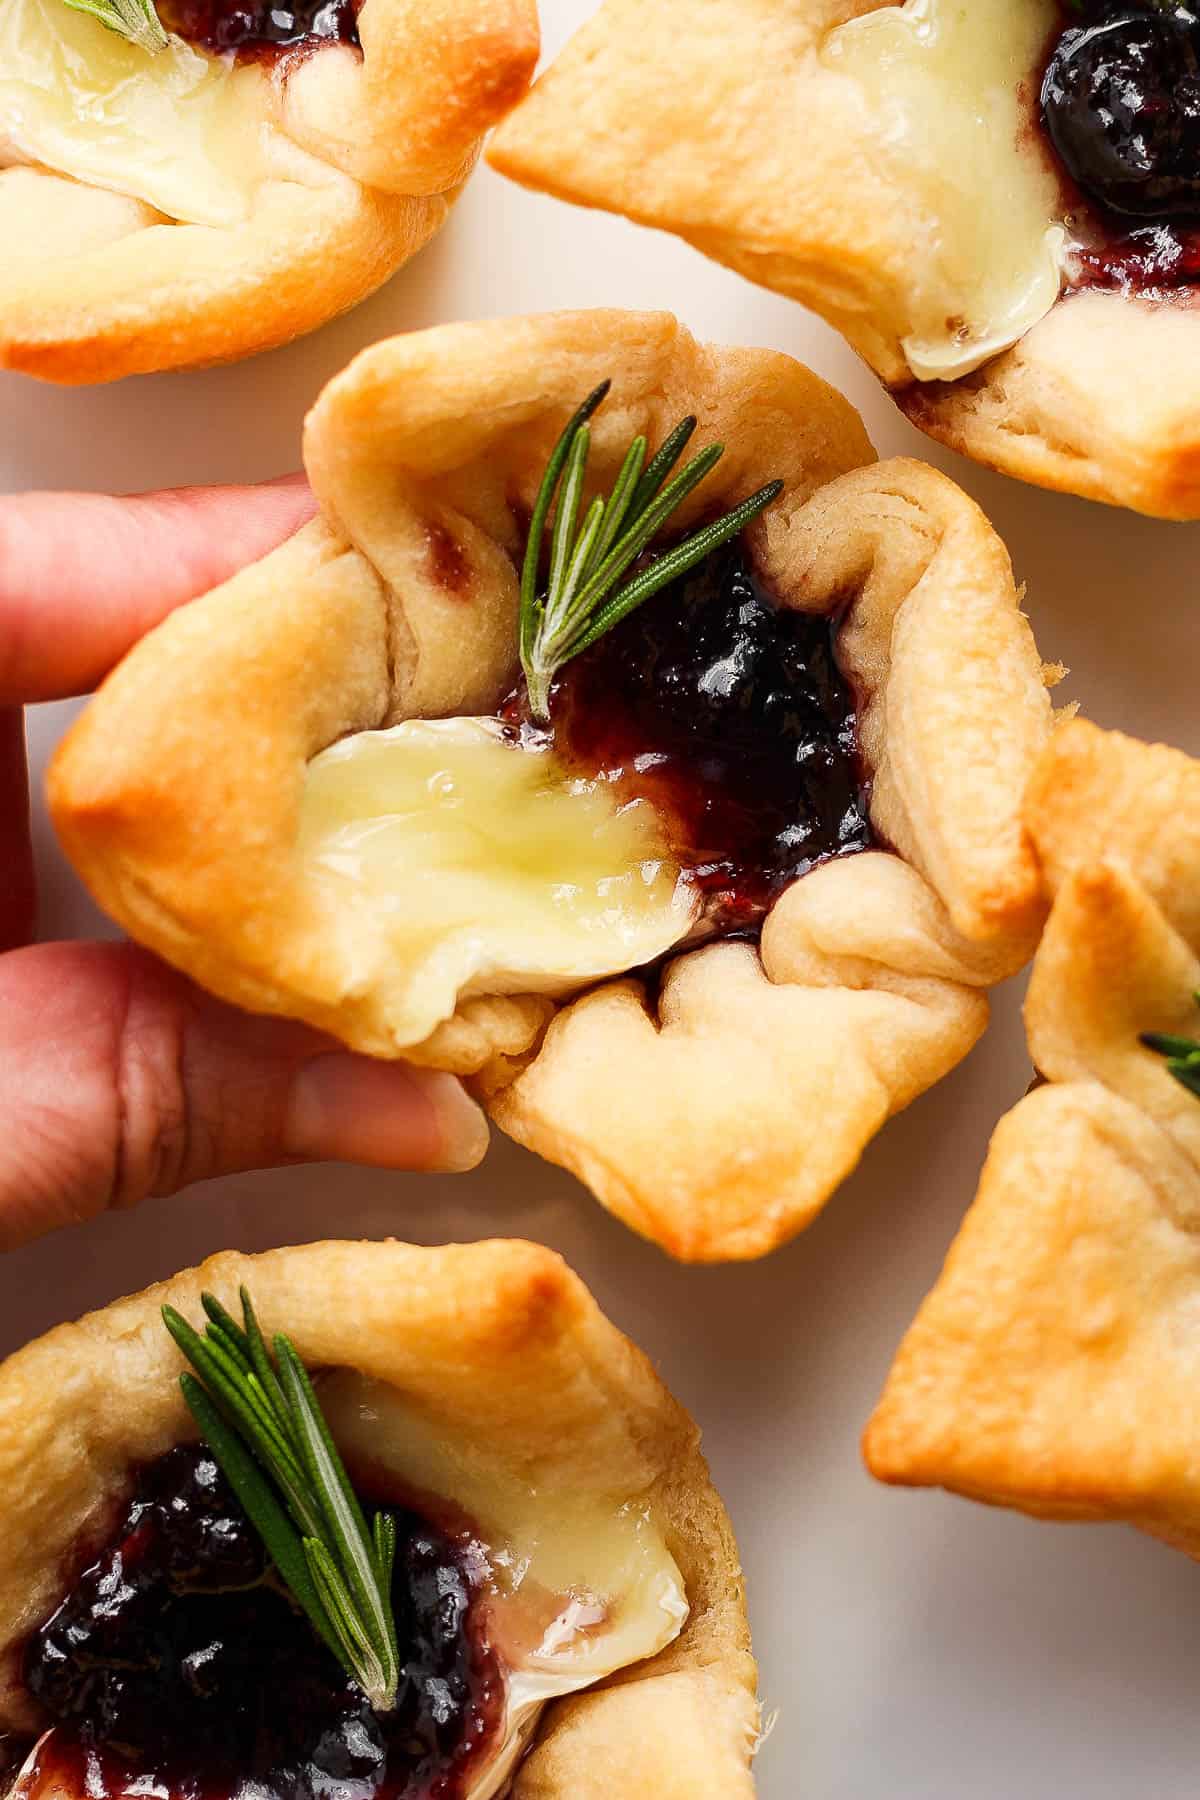 A hand holding a baked brie bite.